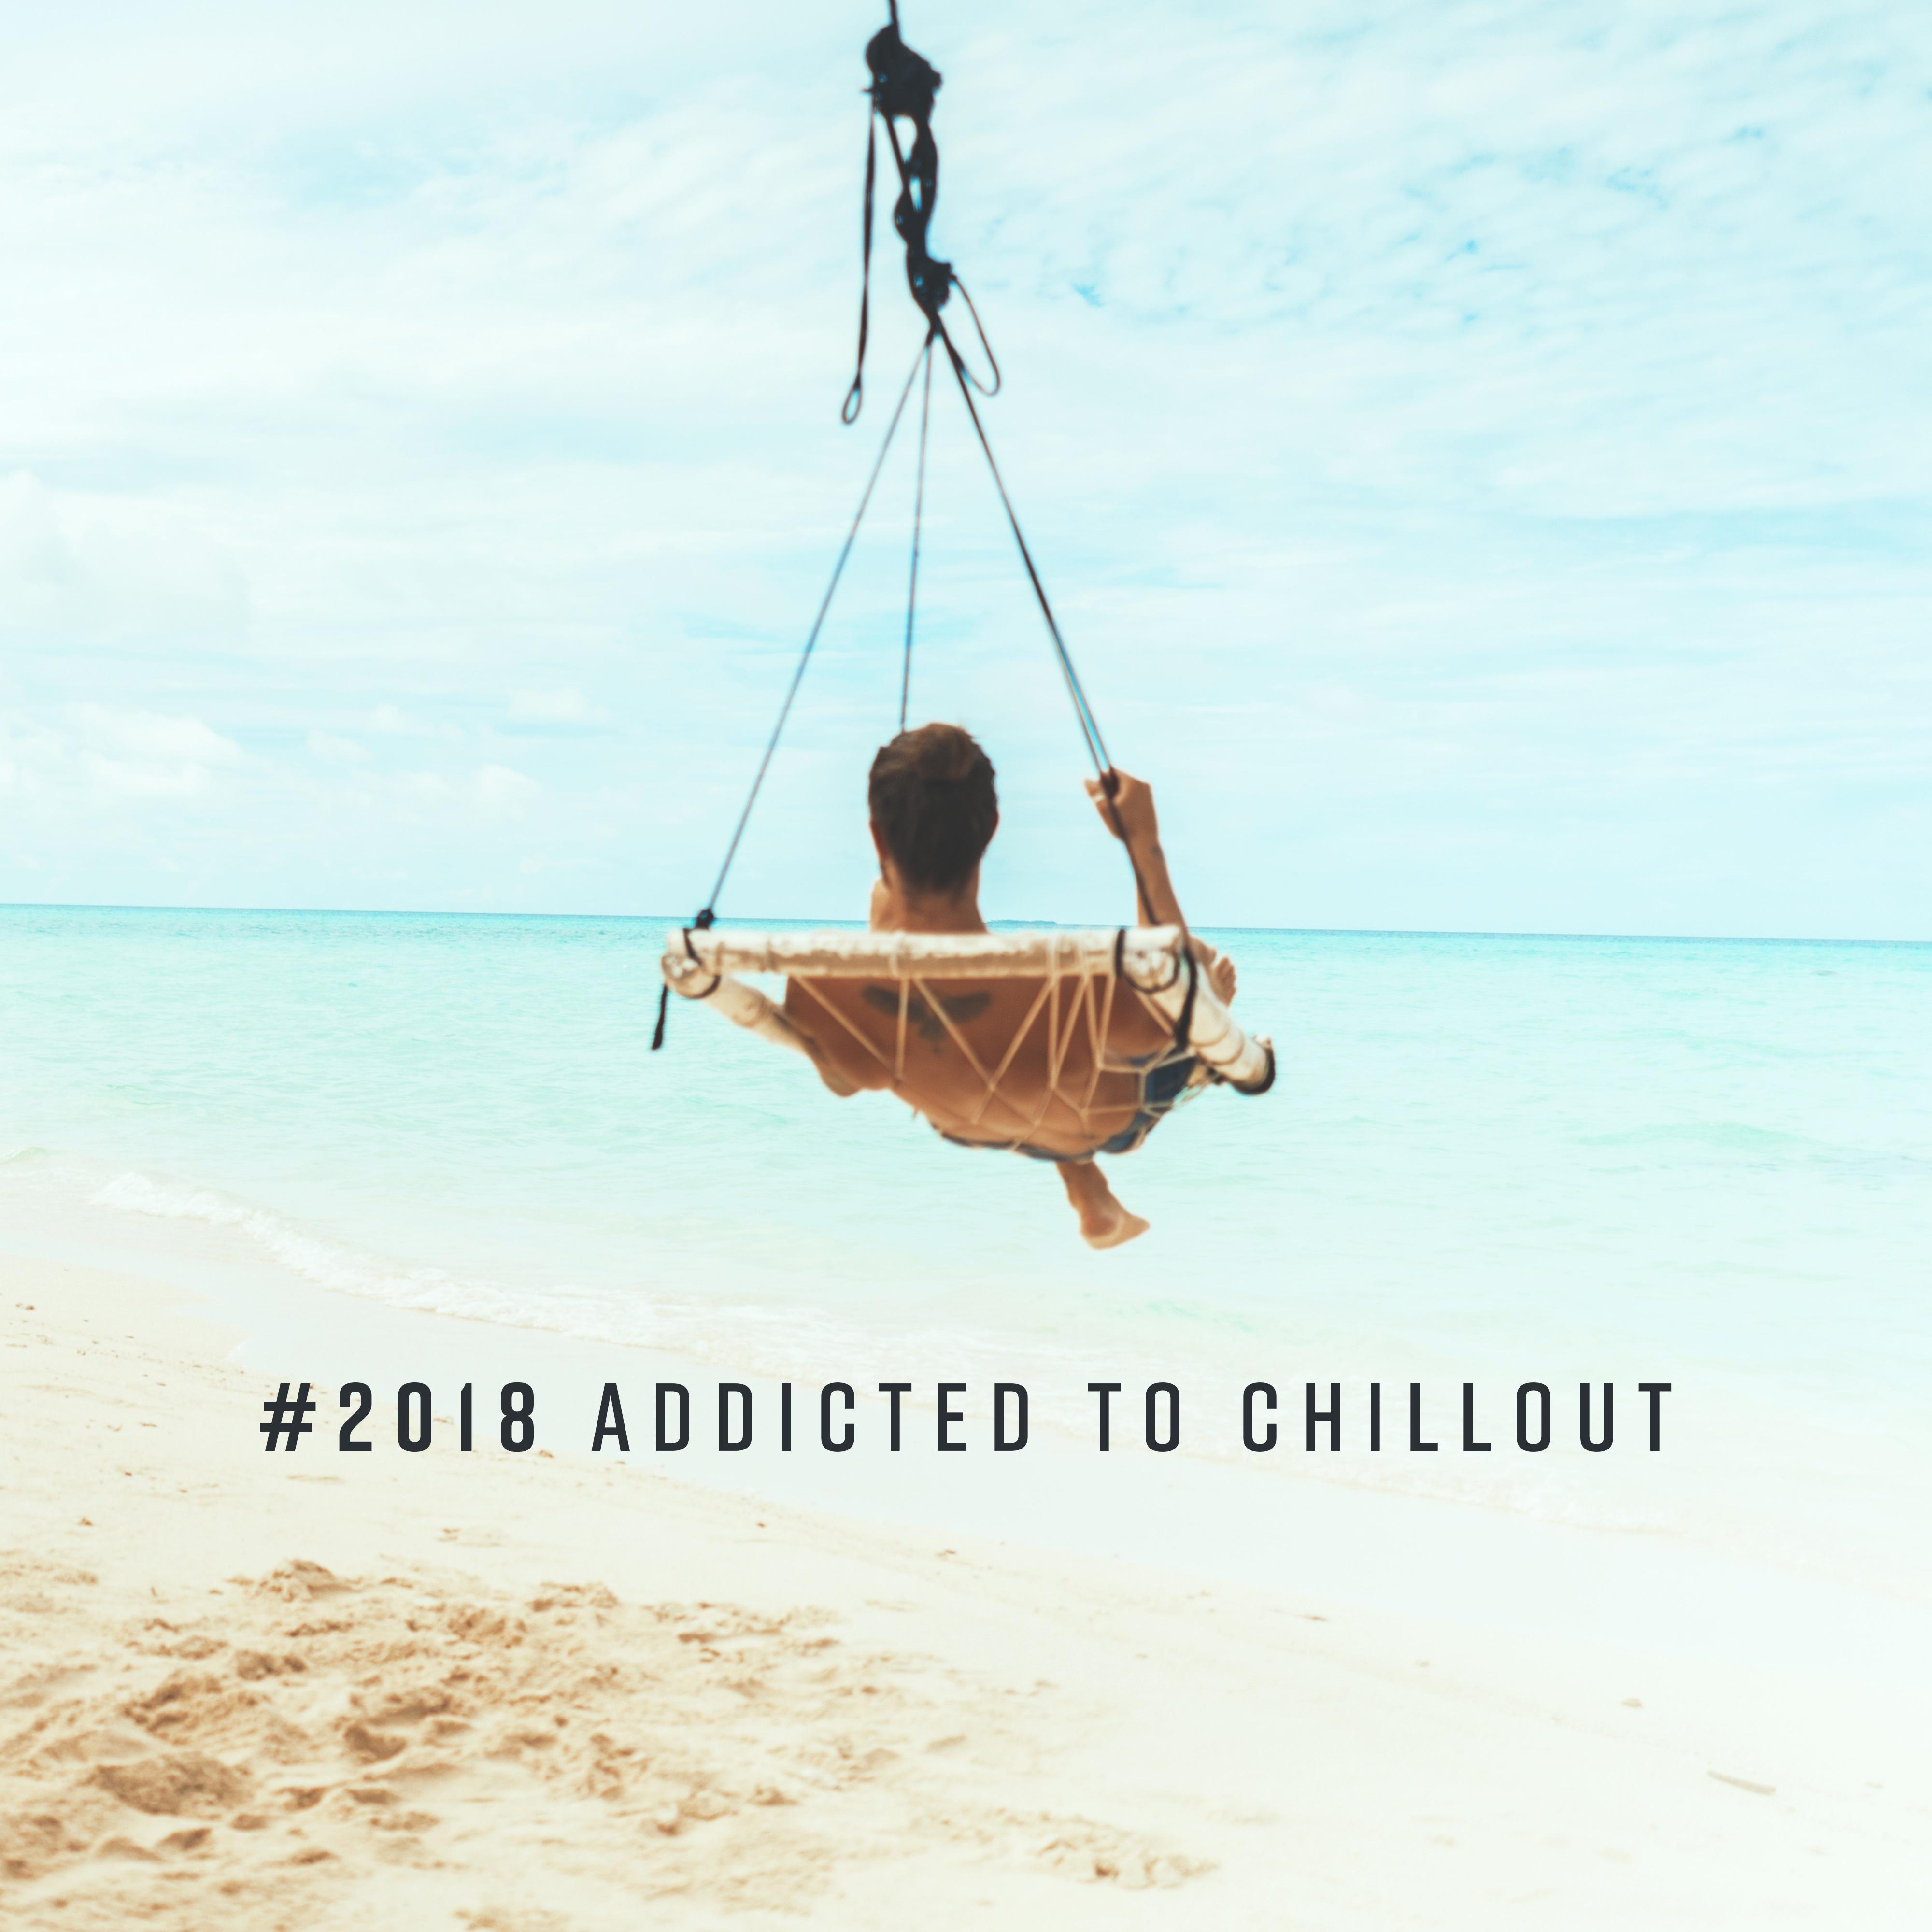 #2018 Addicted to Chillout